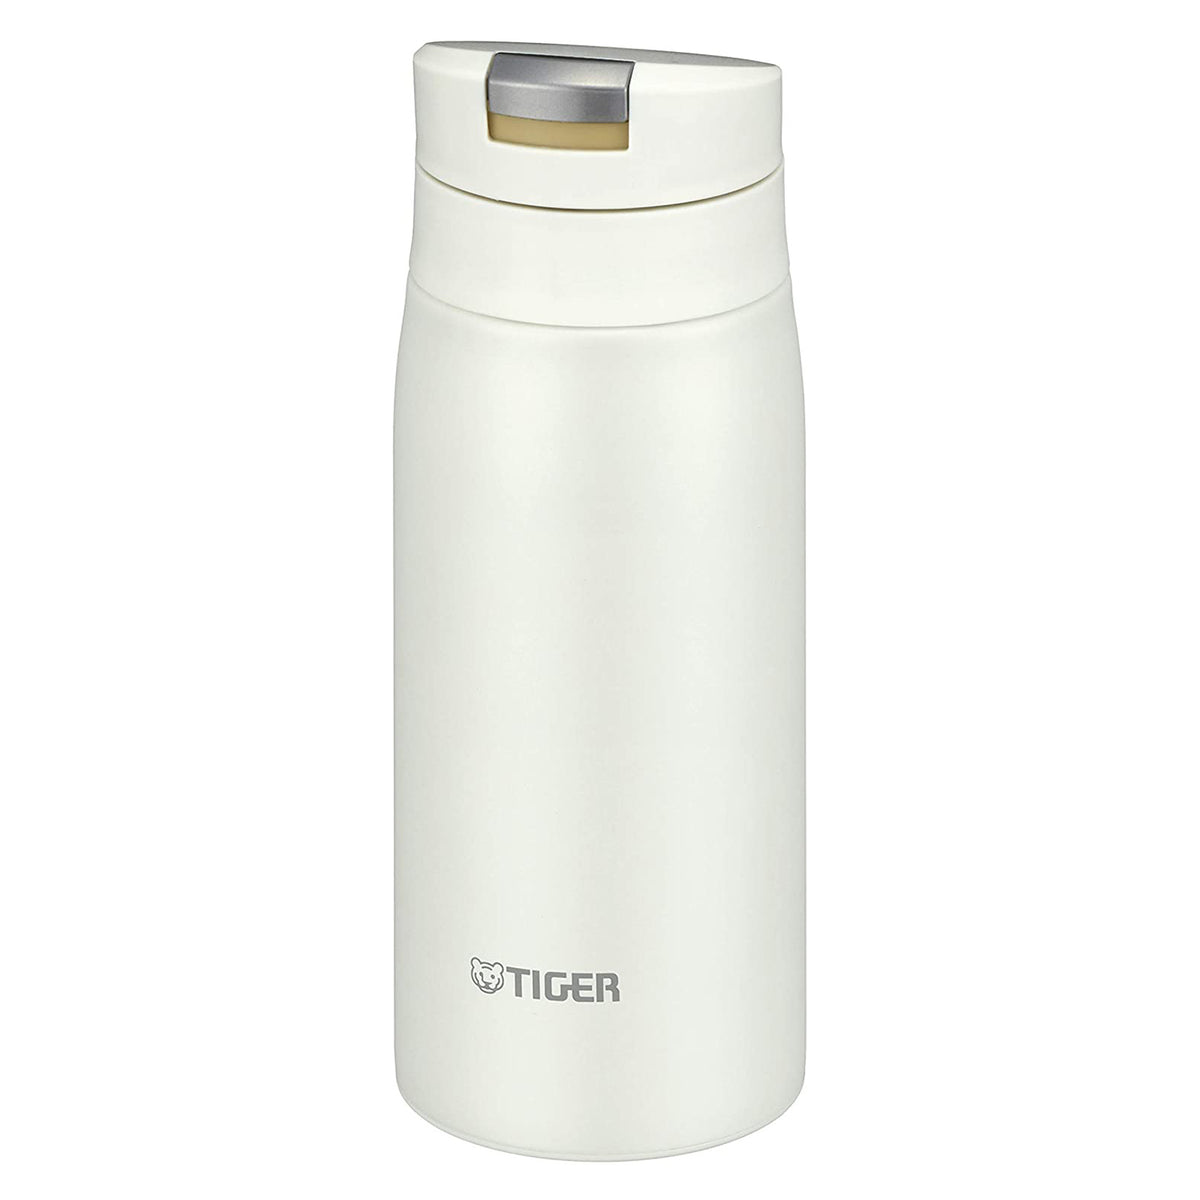 Tiger One Touch Mug Bottle Stainless Steel Water Bottle MCX-A352